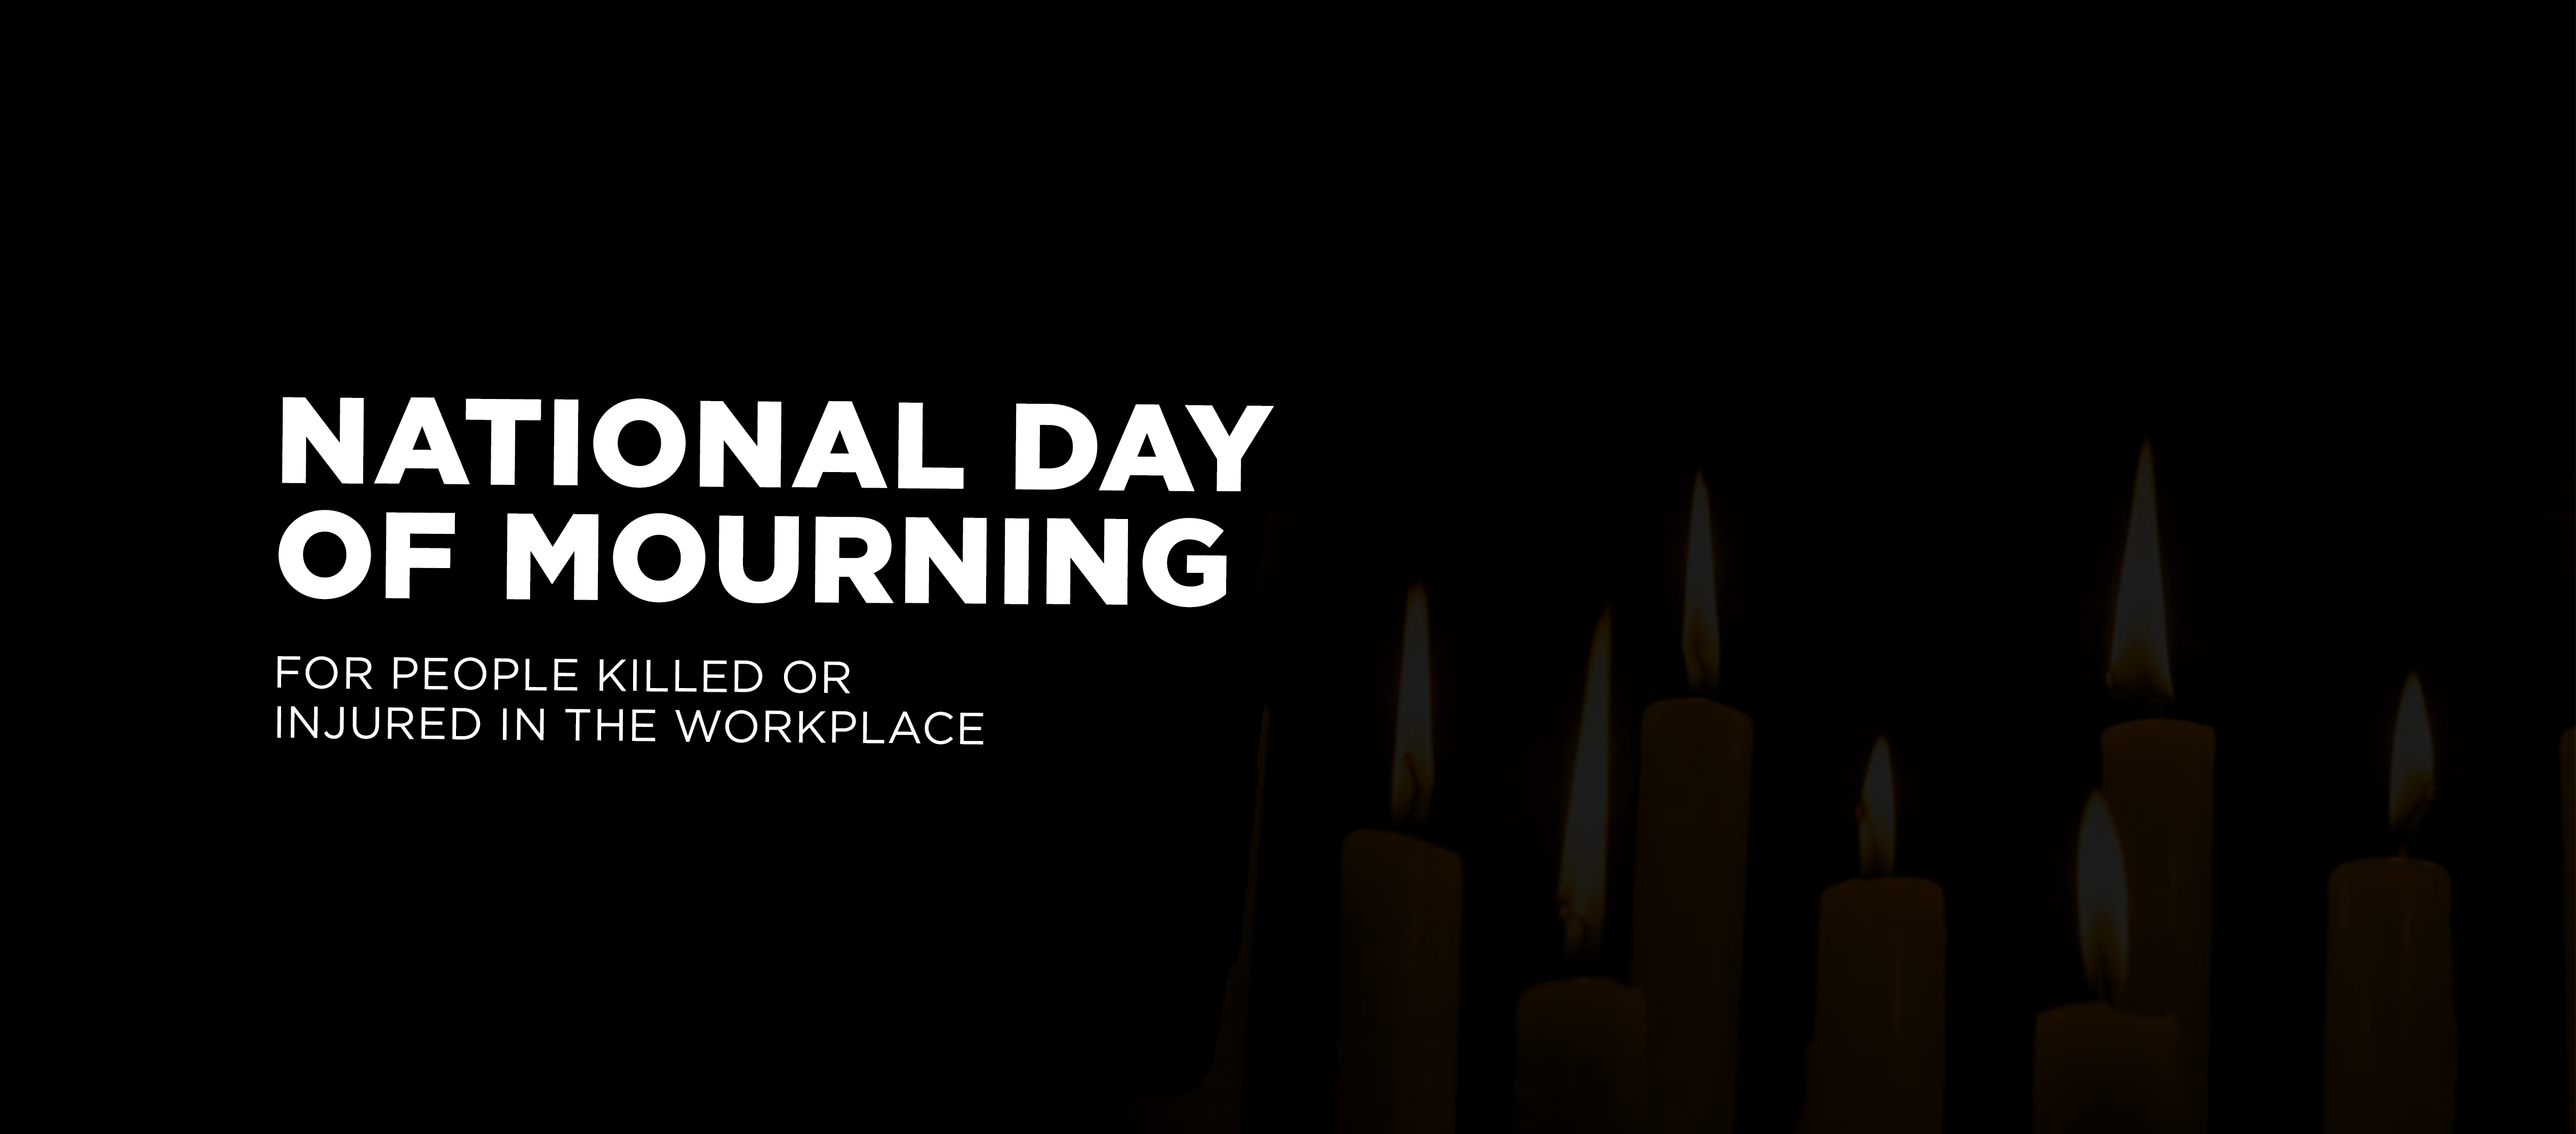 National Day of Mourning for People Killed or Injured in the Workplace